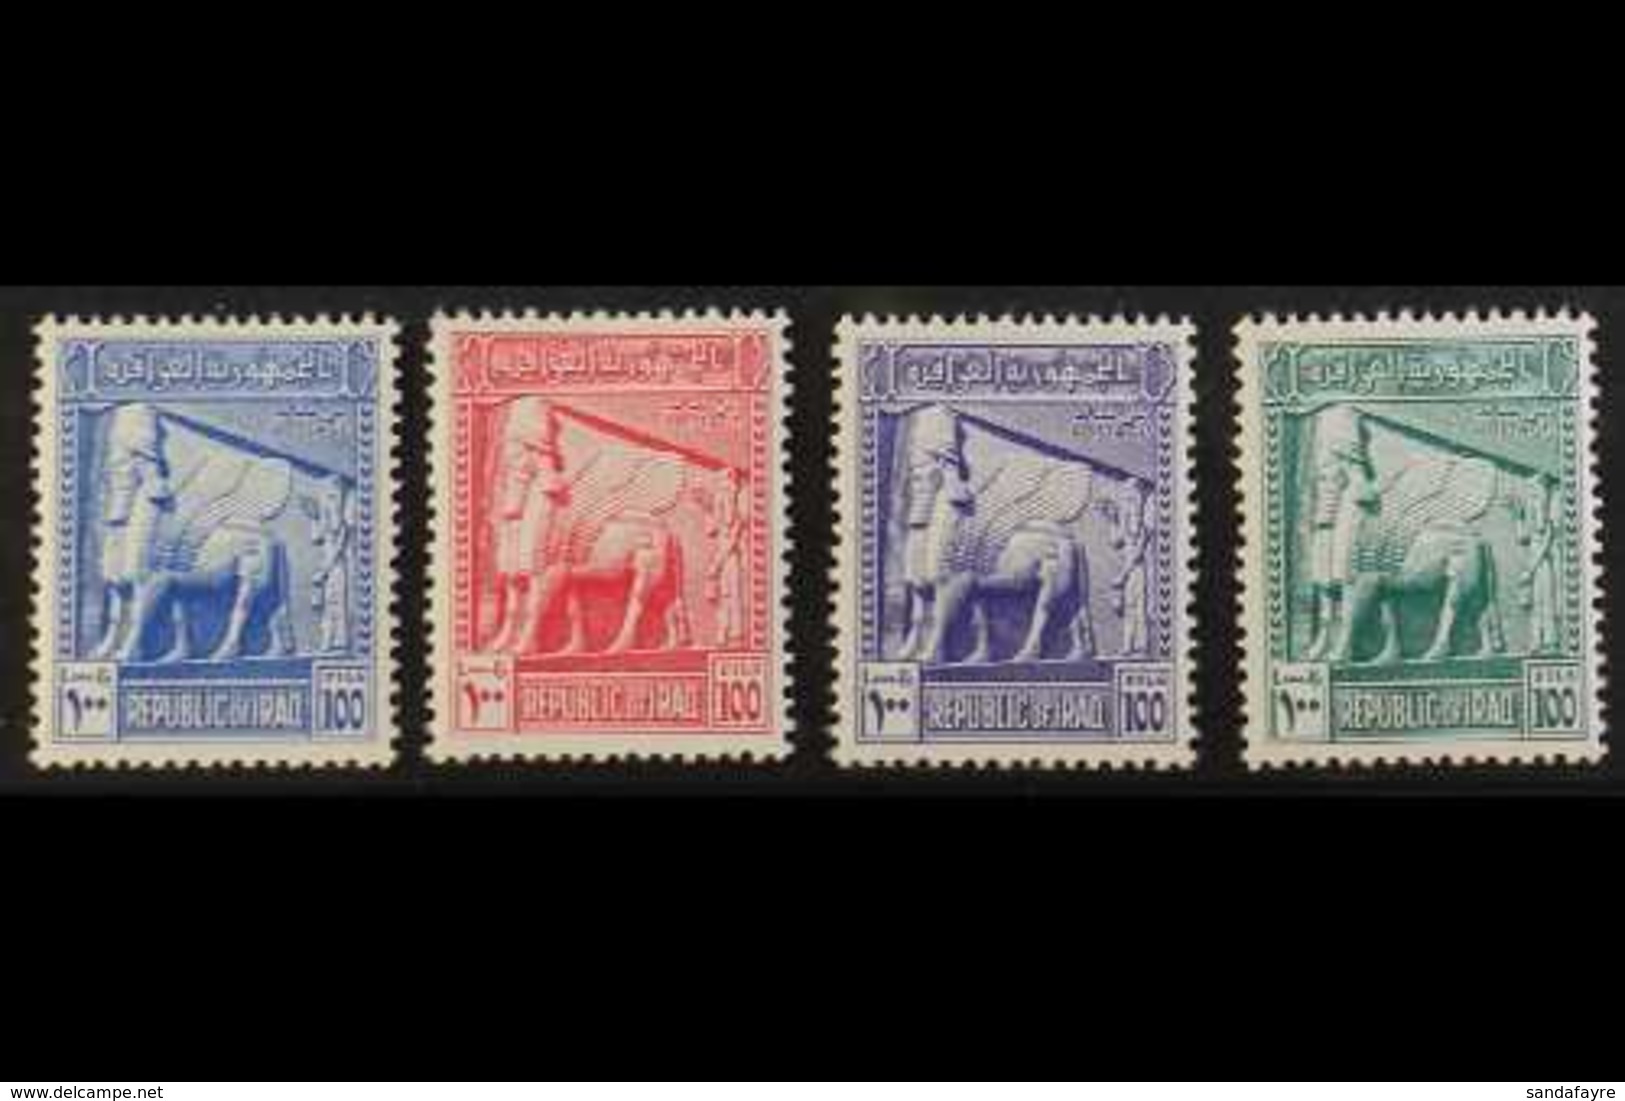 1963 RARE UNADOPTED ESSAYS.  A Complete Set Of Four Different Perforated Essays Showing A Statue Of Lamassu - Assyrian W - Irak